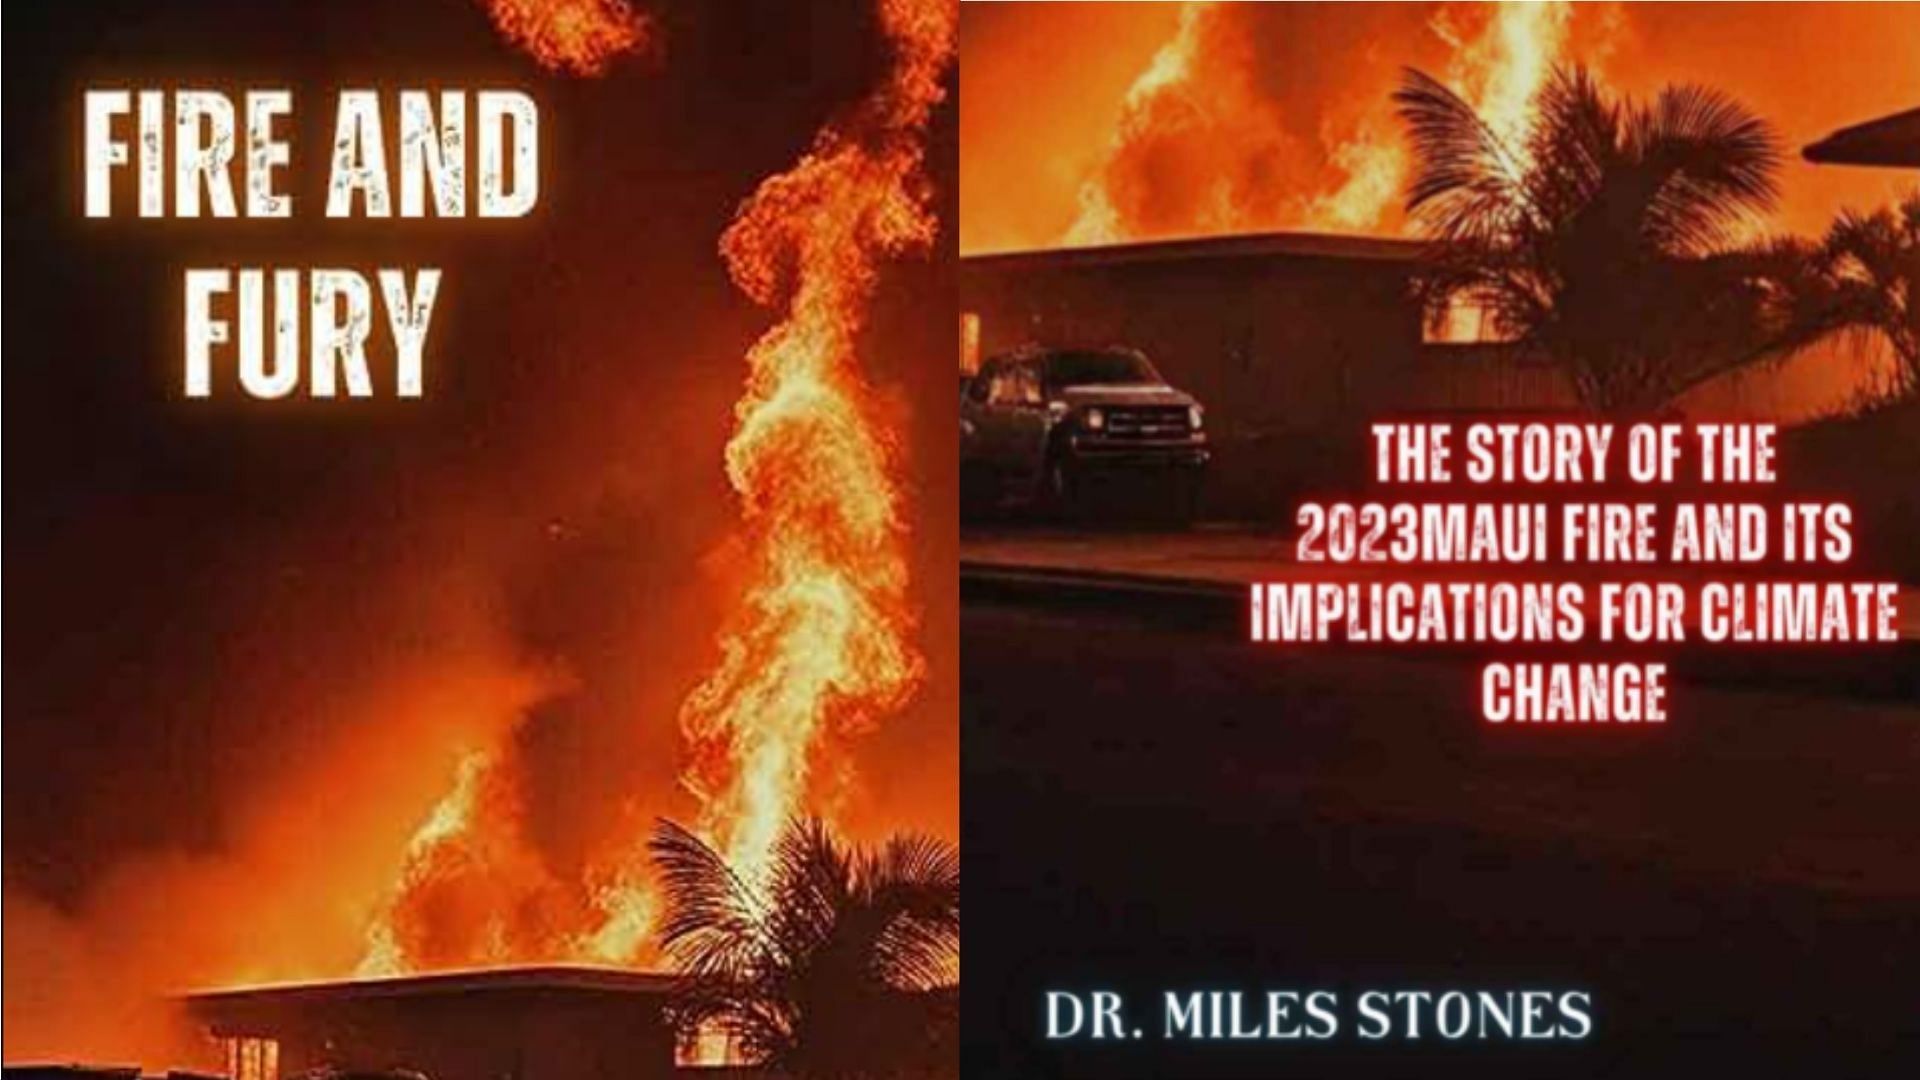 Fire And Fury is a latest book on Maui fires written by Dr. Miles Stones. (Image via Twitter/1776)